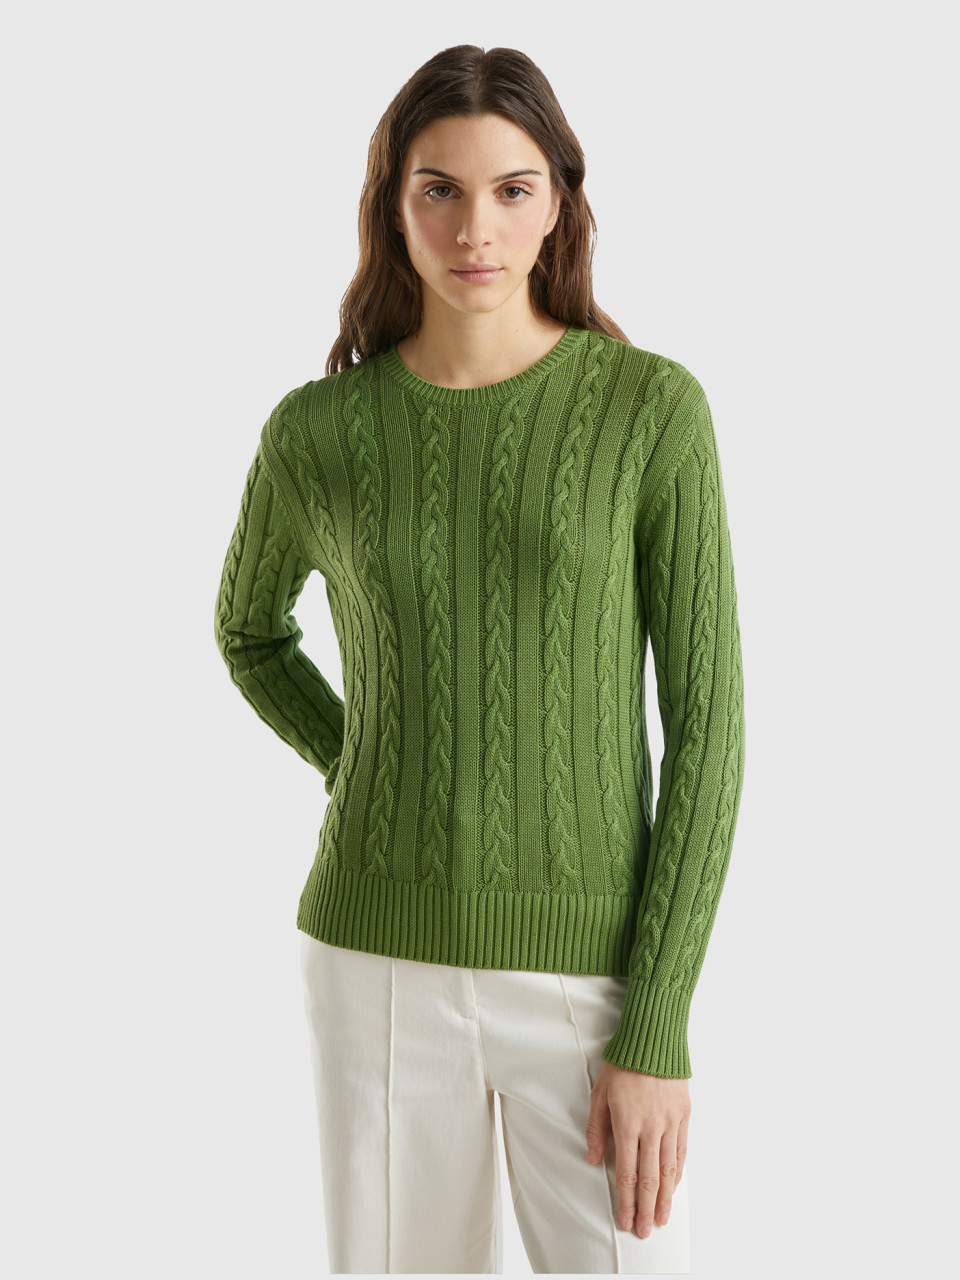 Benetton, Cable Knit Sweater 100% Cotton, Military Green, Women